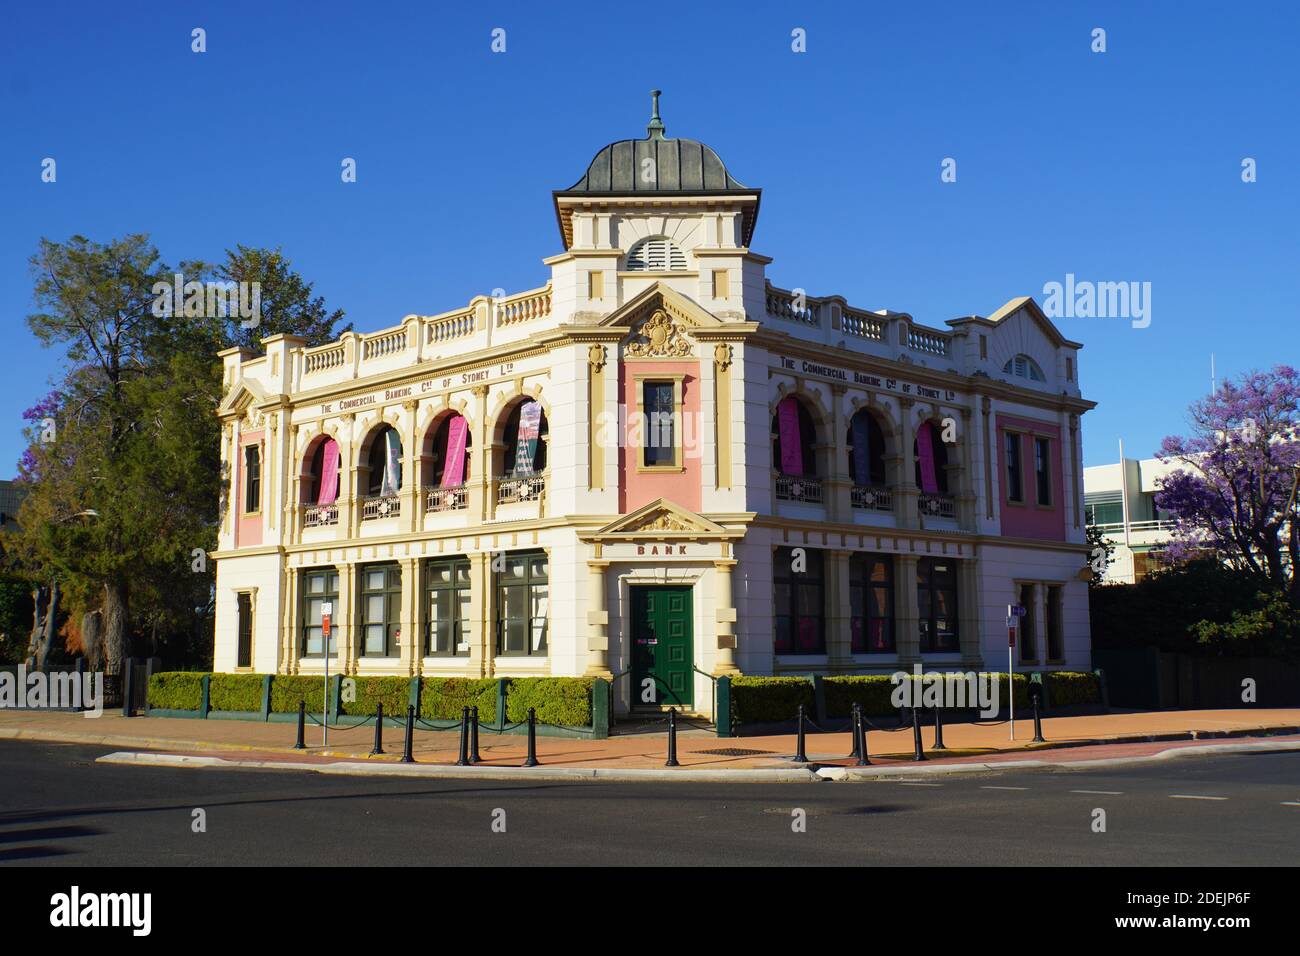 Moree’s Former Commercial Bank Building in Bright Morning Light Stock Photo